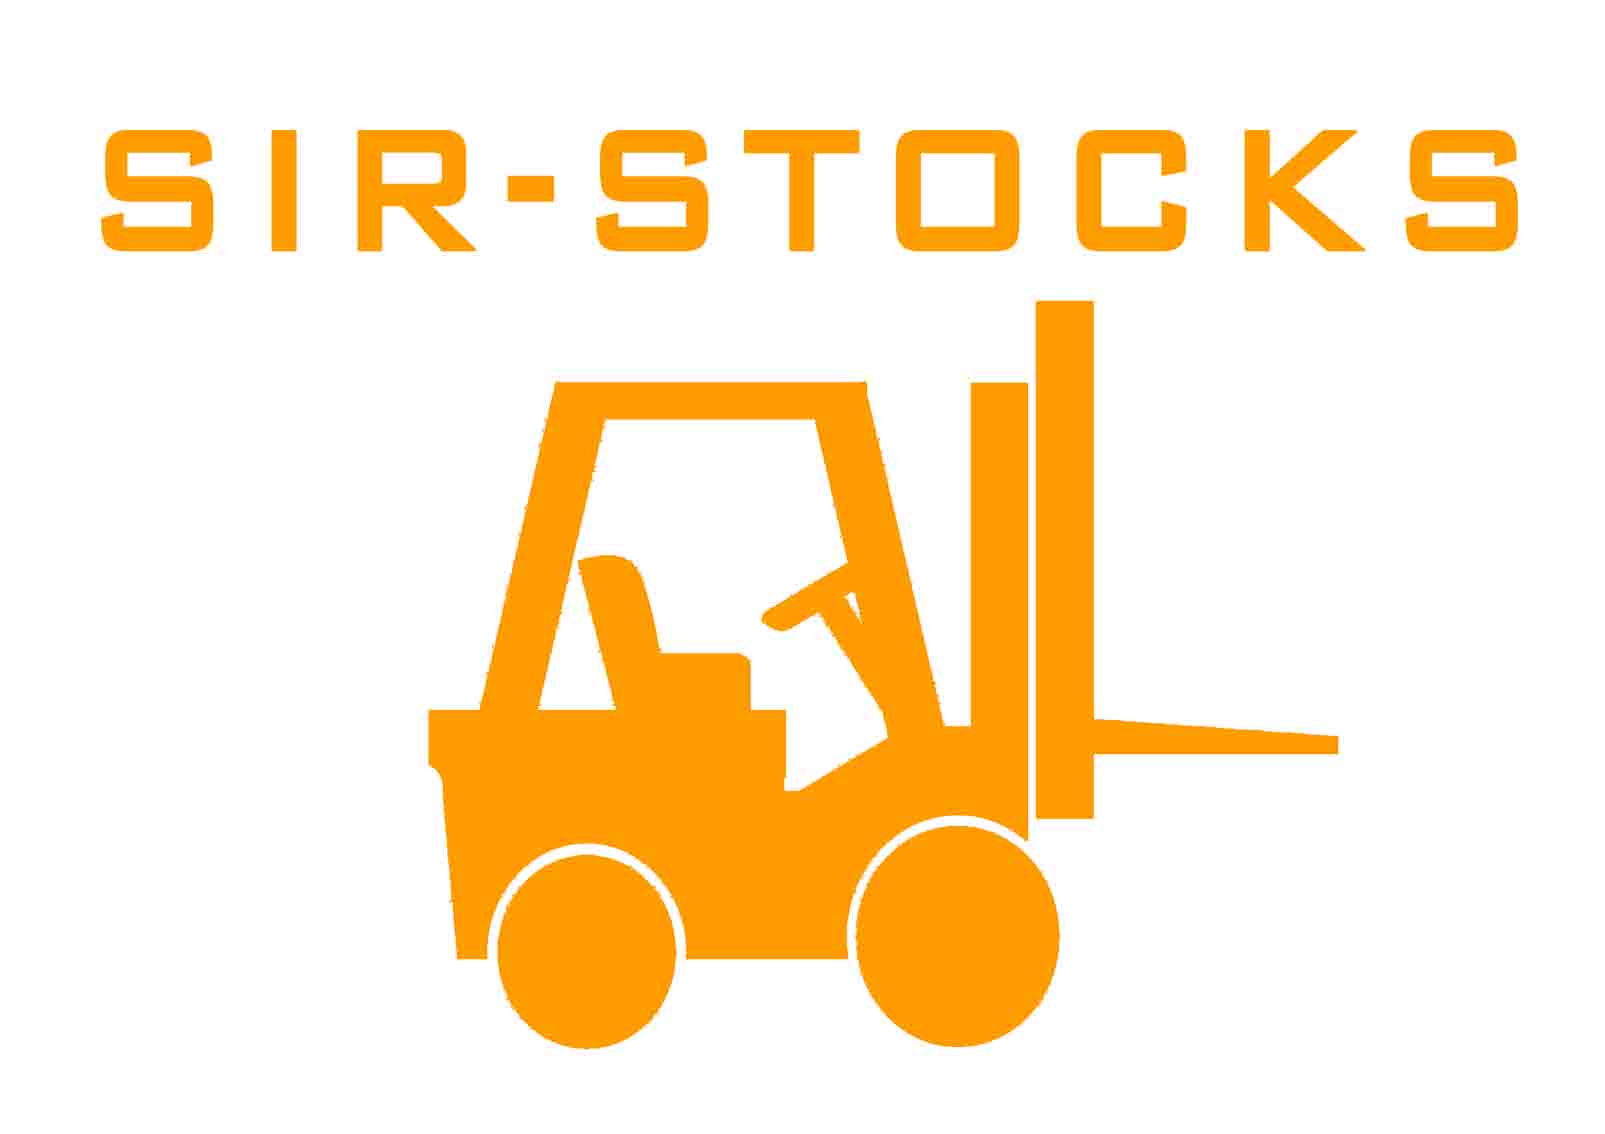 sirstocks an excel based pos software